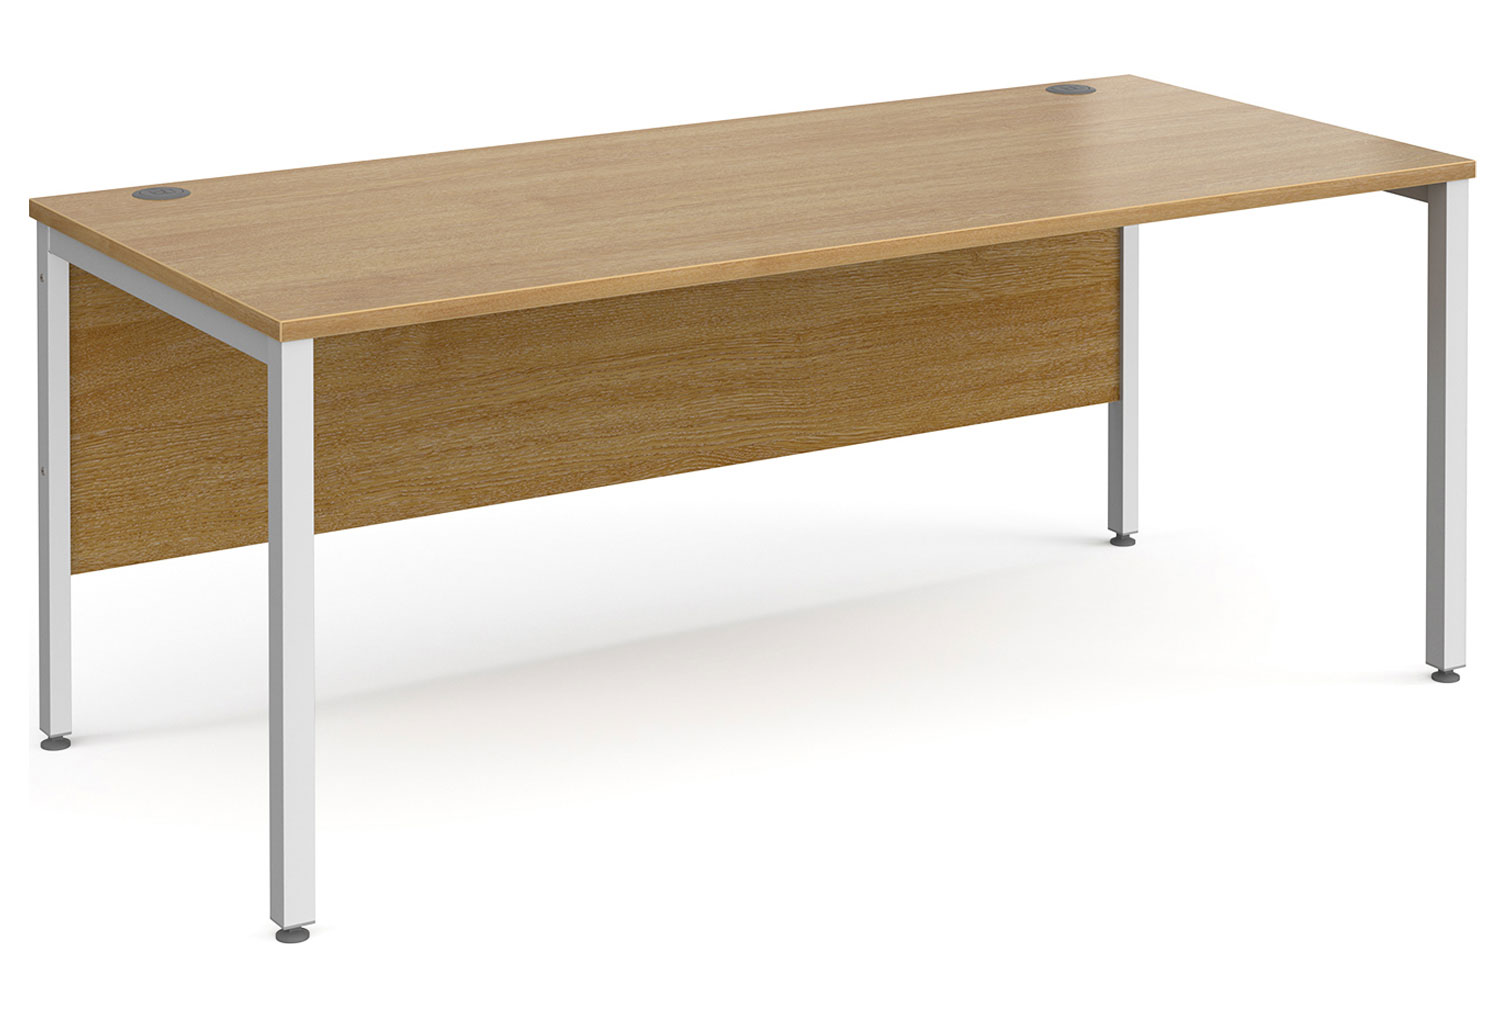 Tully Bench Rectangular Office Desk 180wx80dx73h (cm), Oak, Express Delivery